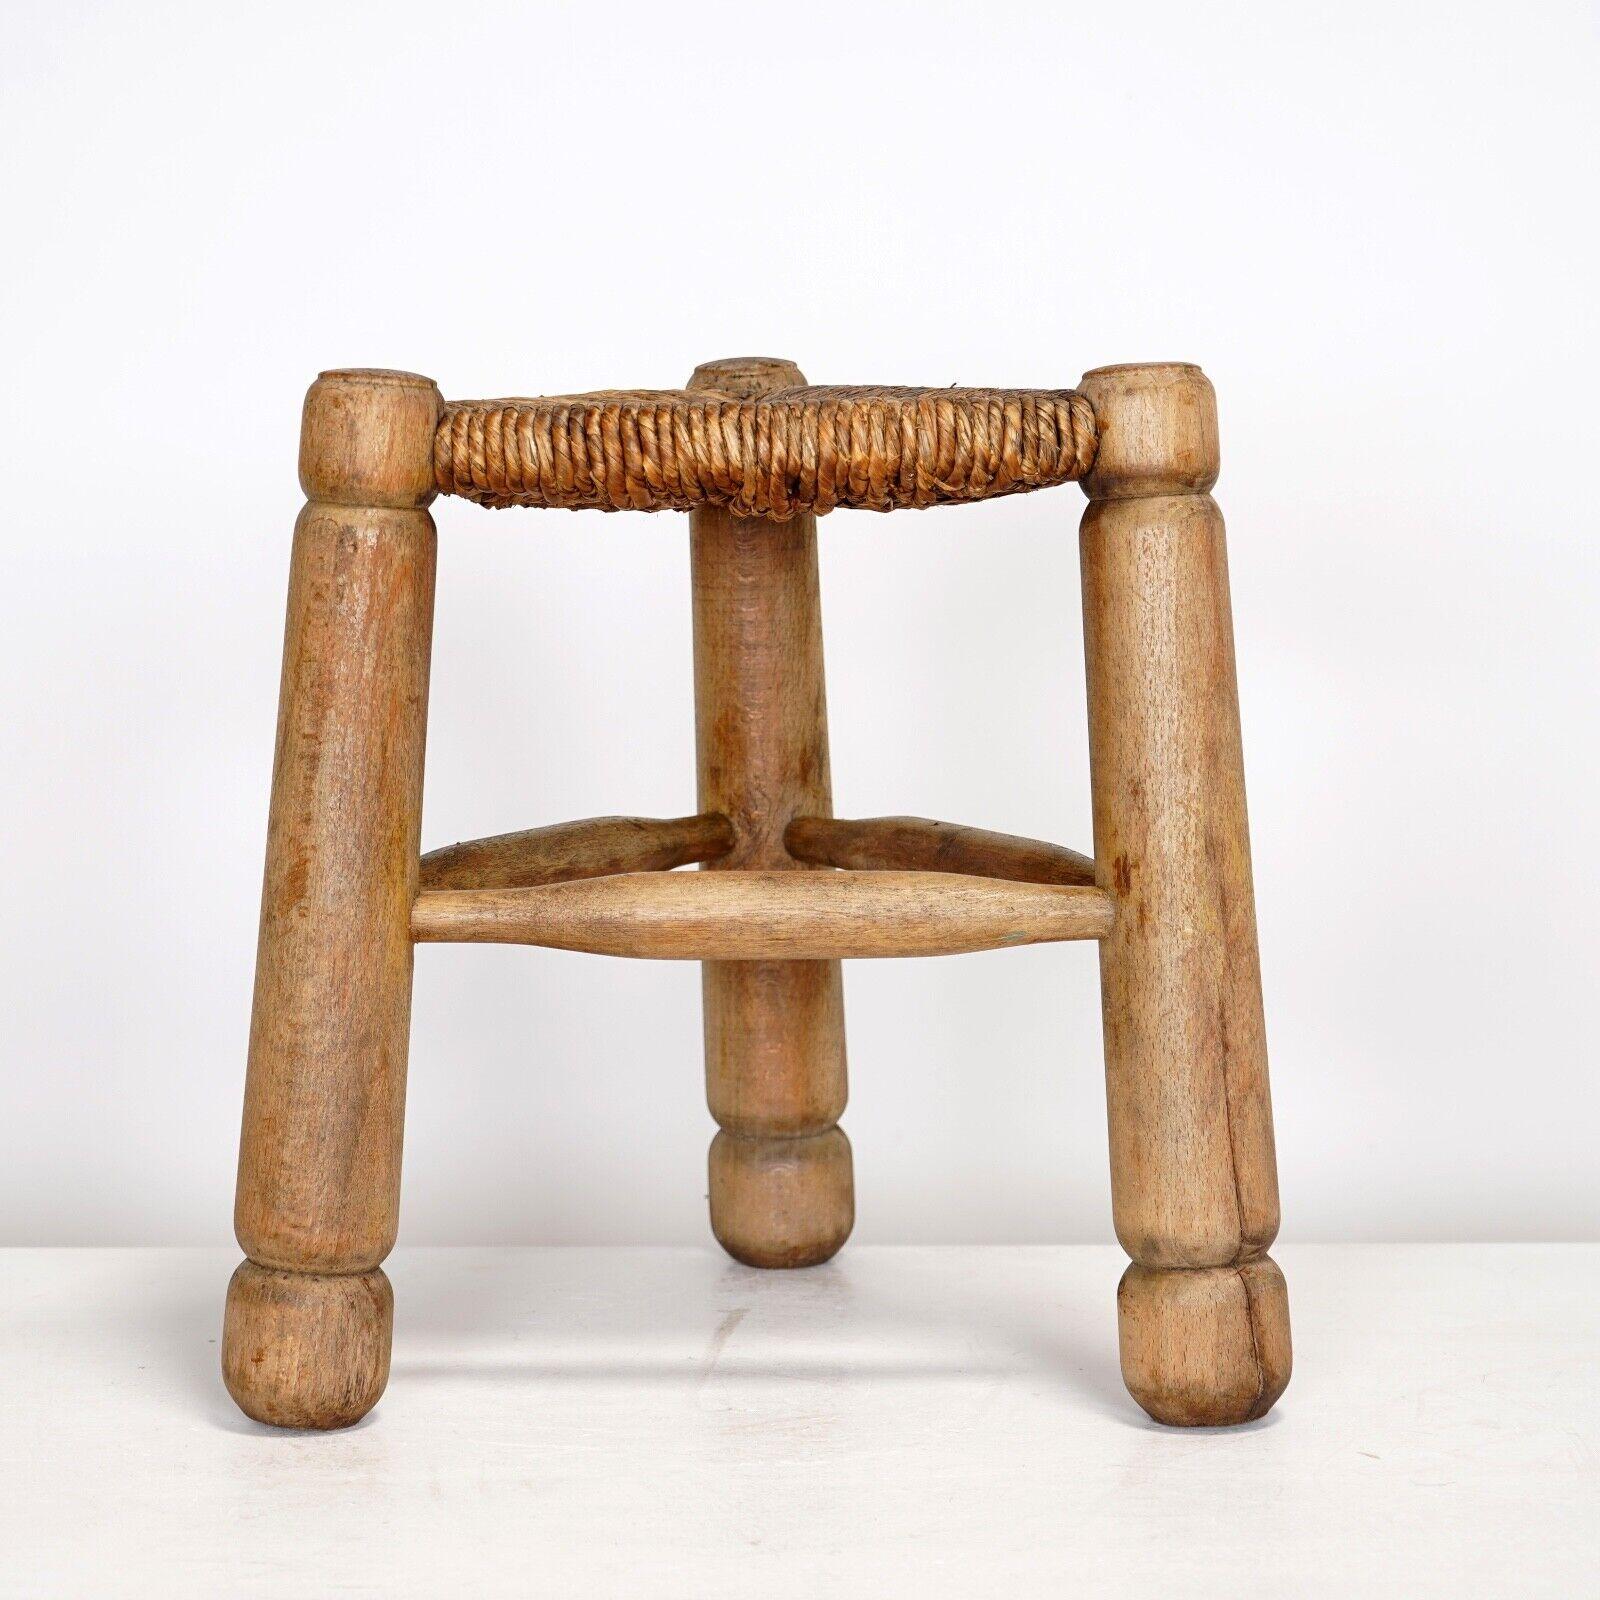 Triangular oak stool with rush woven seat in the style of Charles Dudouyt circa 1940s. 
Thick chunky legs with the round finials indicative of the French designer Charles Dudouyt. 
In good vintage condition, rush seat perfect. All round solid and